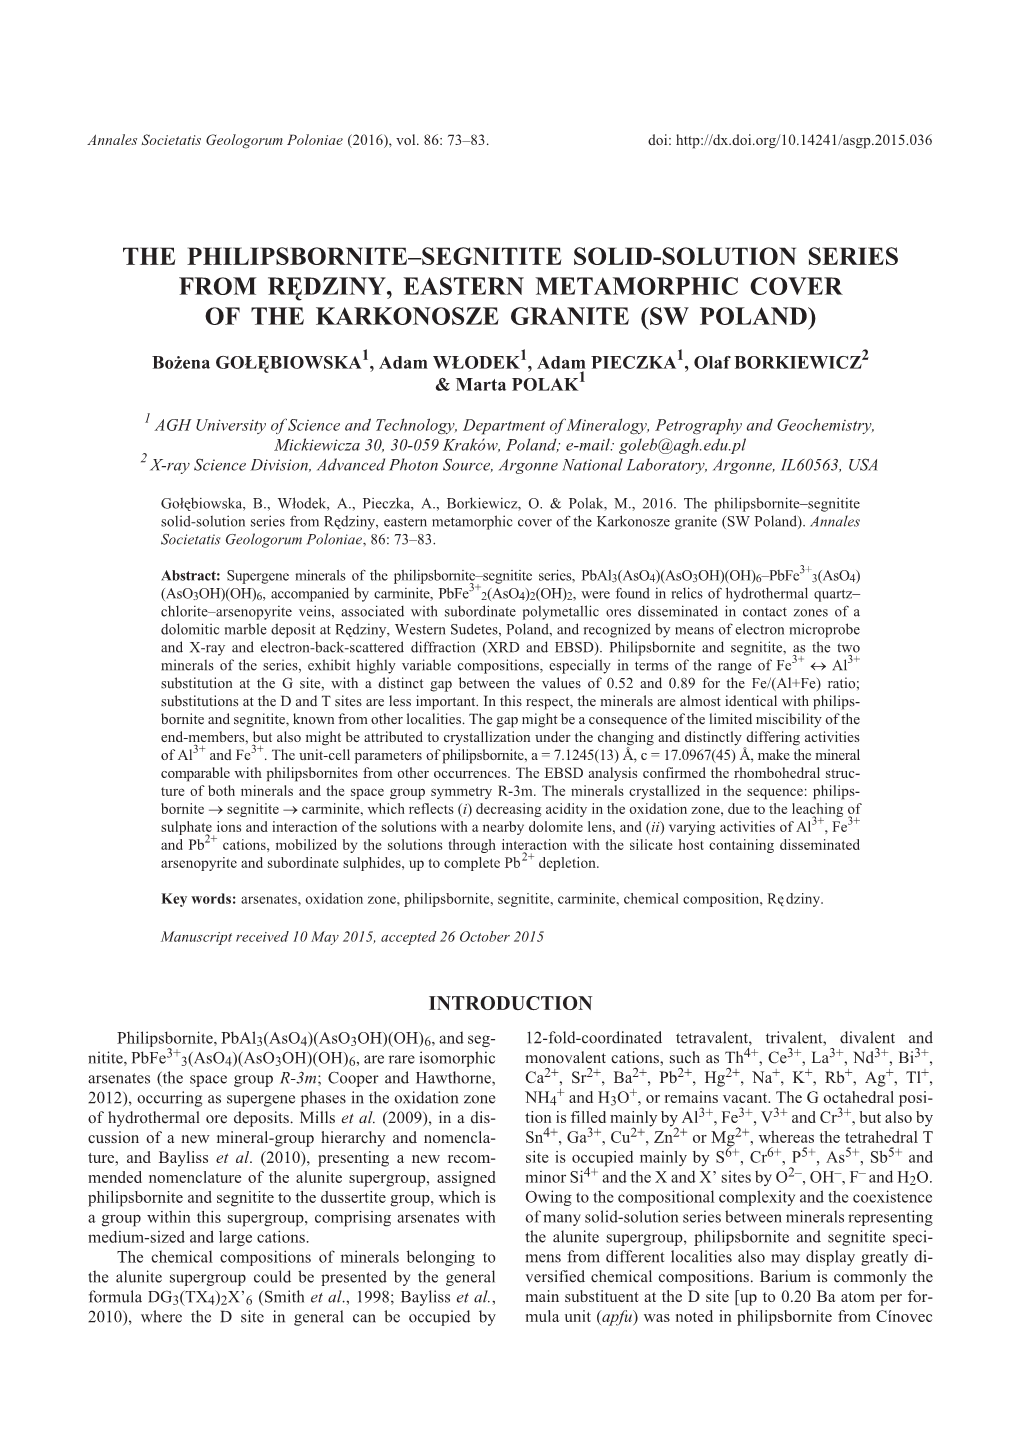 The Philipsbornite–Segnitite Solid-Solution Series from Rêdziny, Eastern Metamorphic Cover of the Karkonosze Granite (Sw Poland)